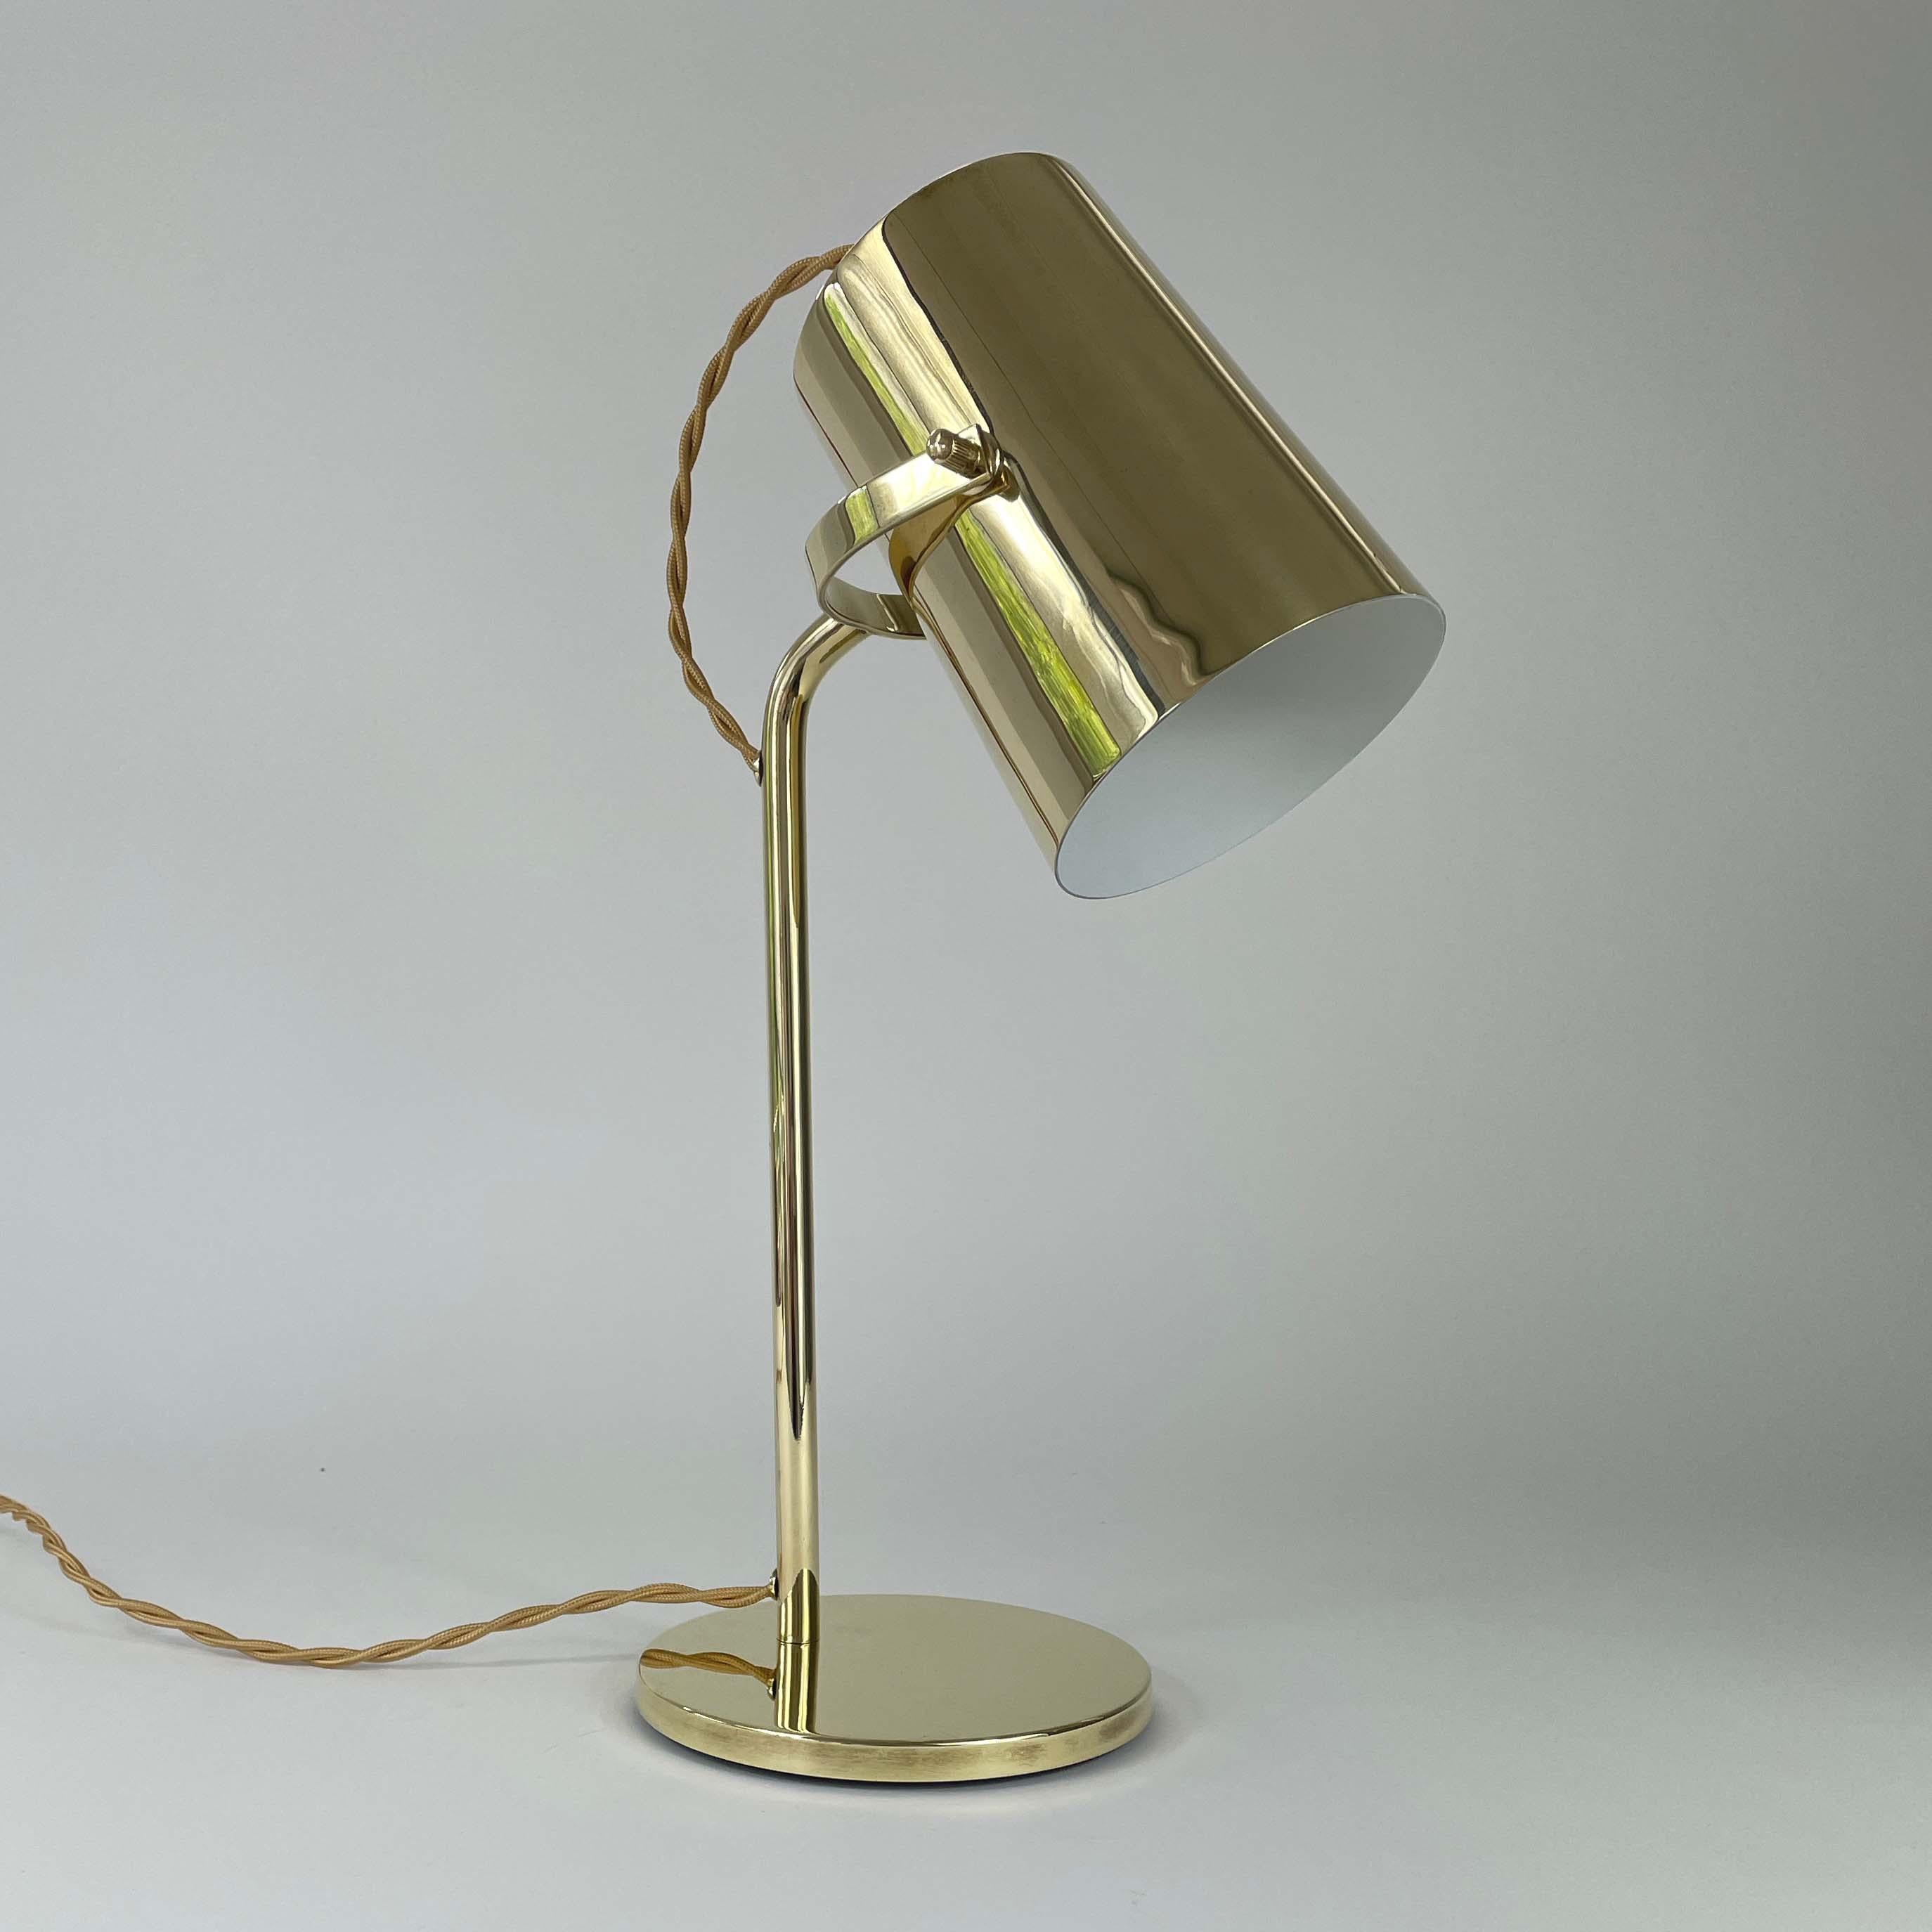 This unusual desk light was designed and manufactured in Finland in the 1940s to 1950s. It features an adjustable solid brass lampshade, brass lamp arm and brass base.

The light has been rewired with new gold colored silk cord and requires one E27